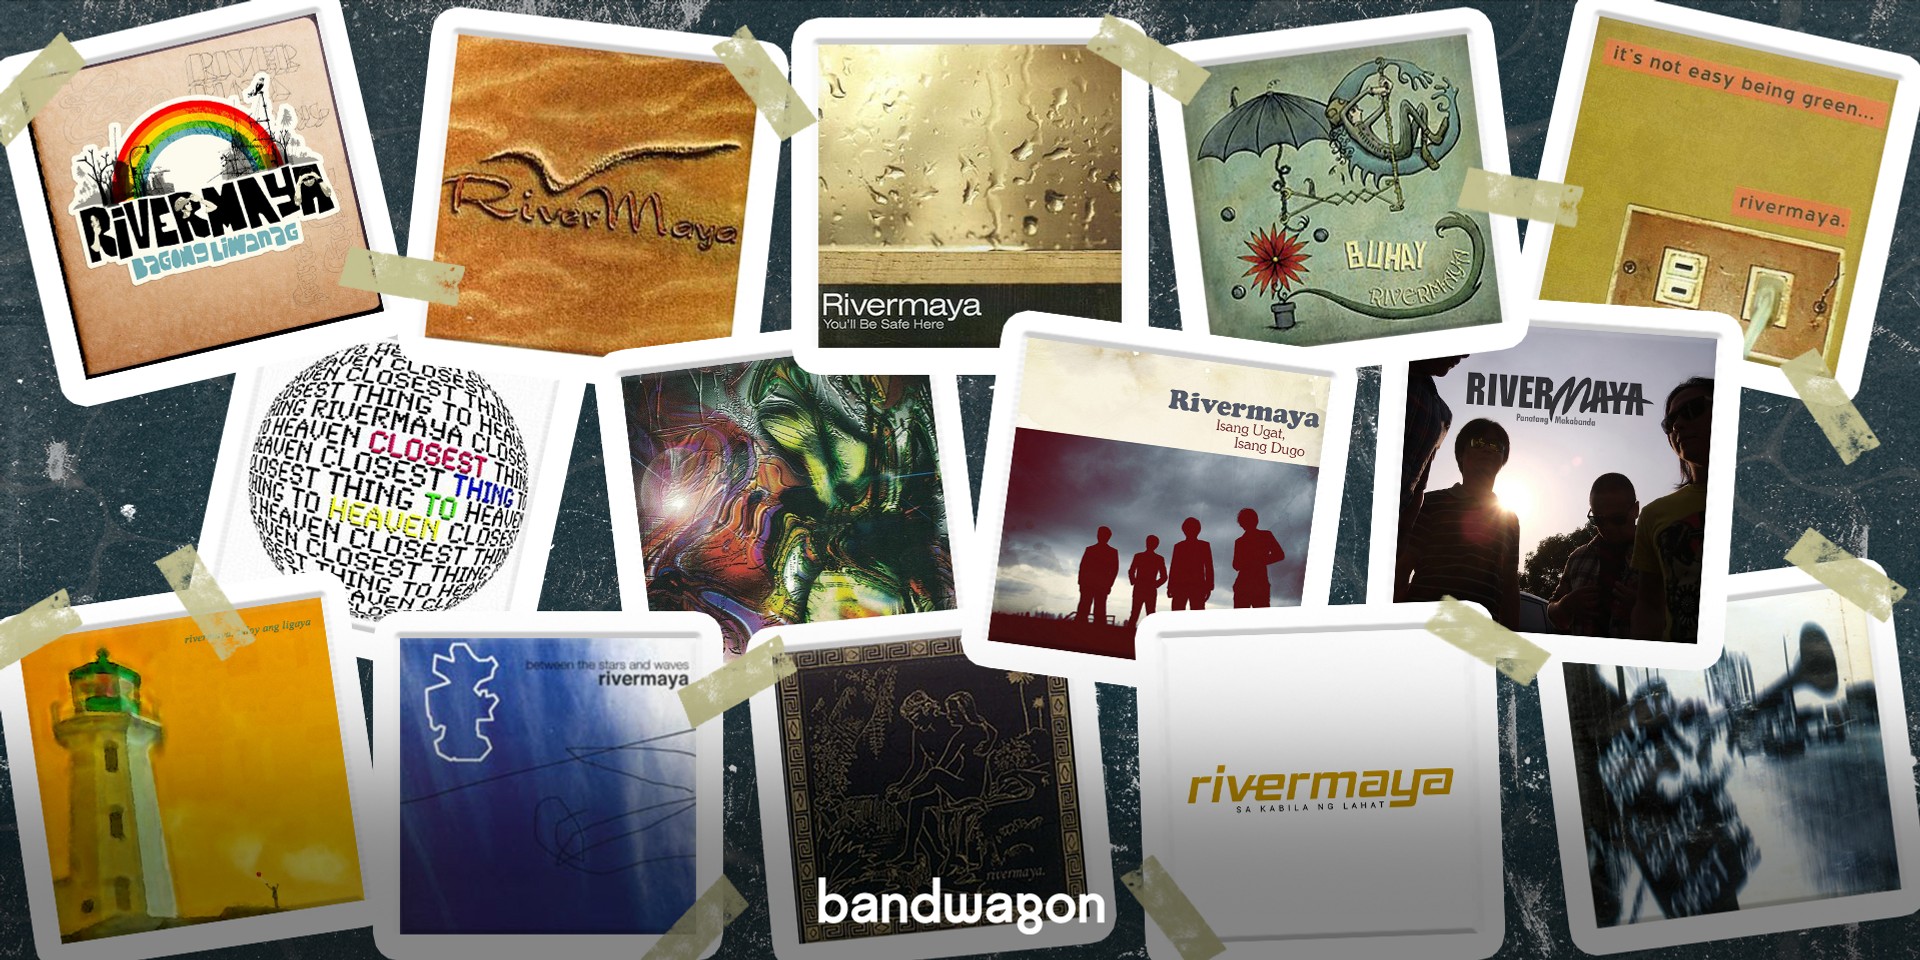 Rivermaya through the years: a timeline – past and present members, discography, stories, and more